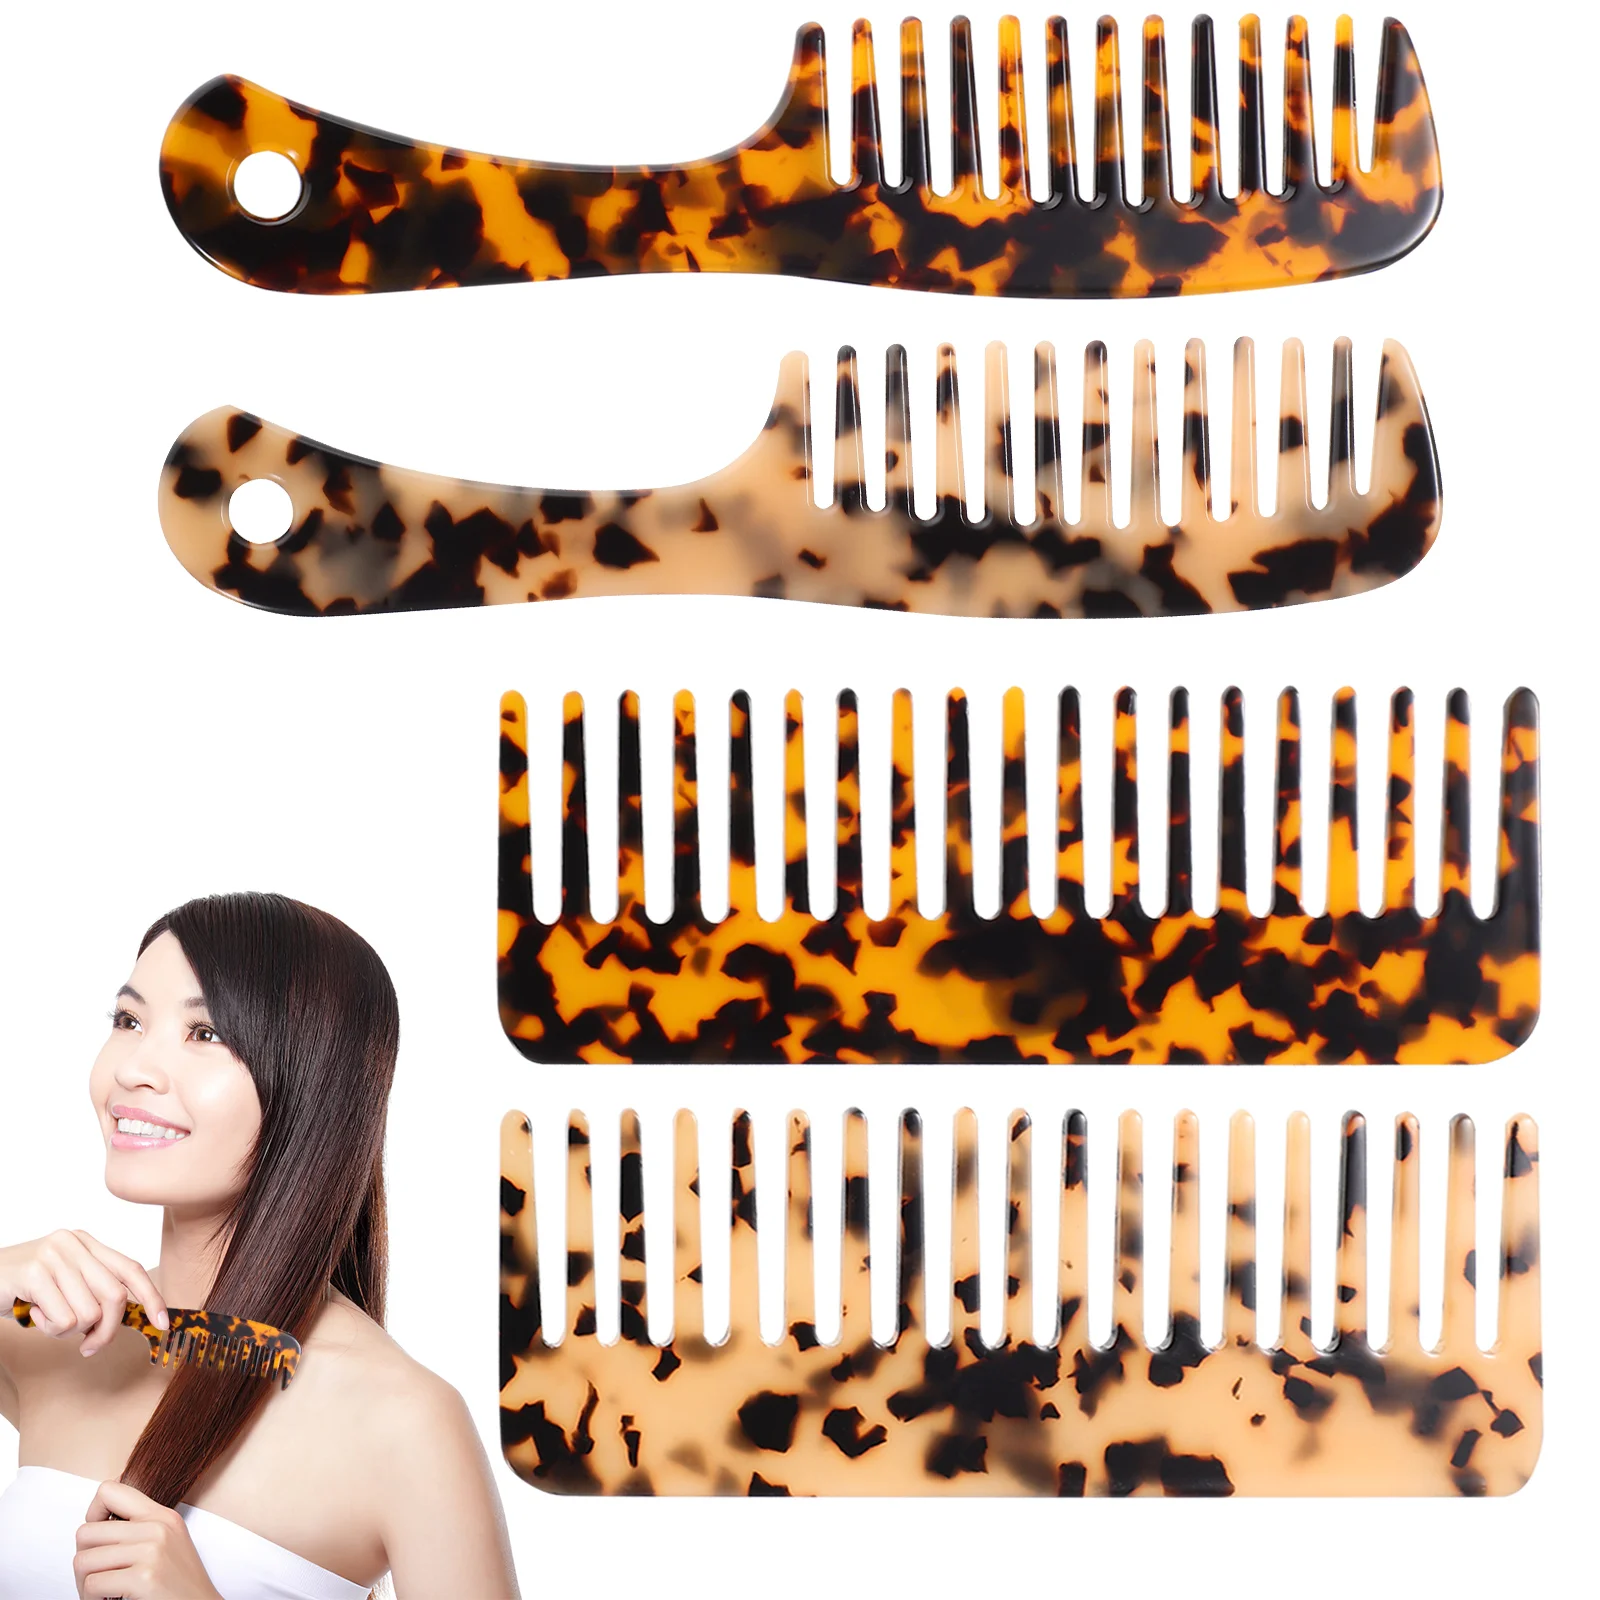 

4Pcs Leopard Print Hair Comb Wide Tooth Acetic Acid Hair Detangler Comb for Thick Curly Wavy Hair